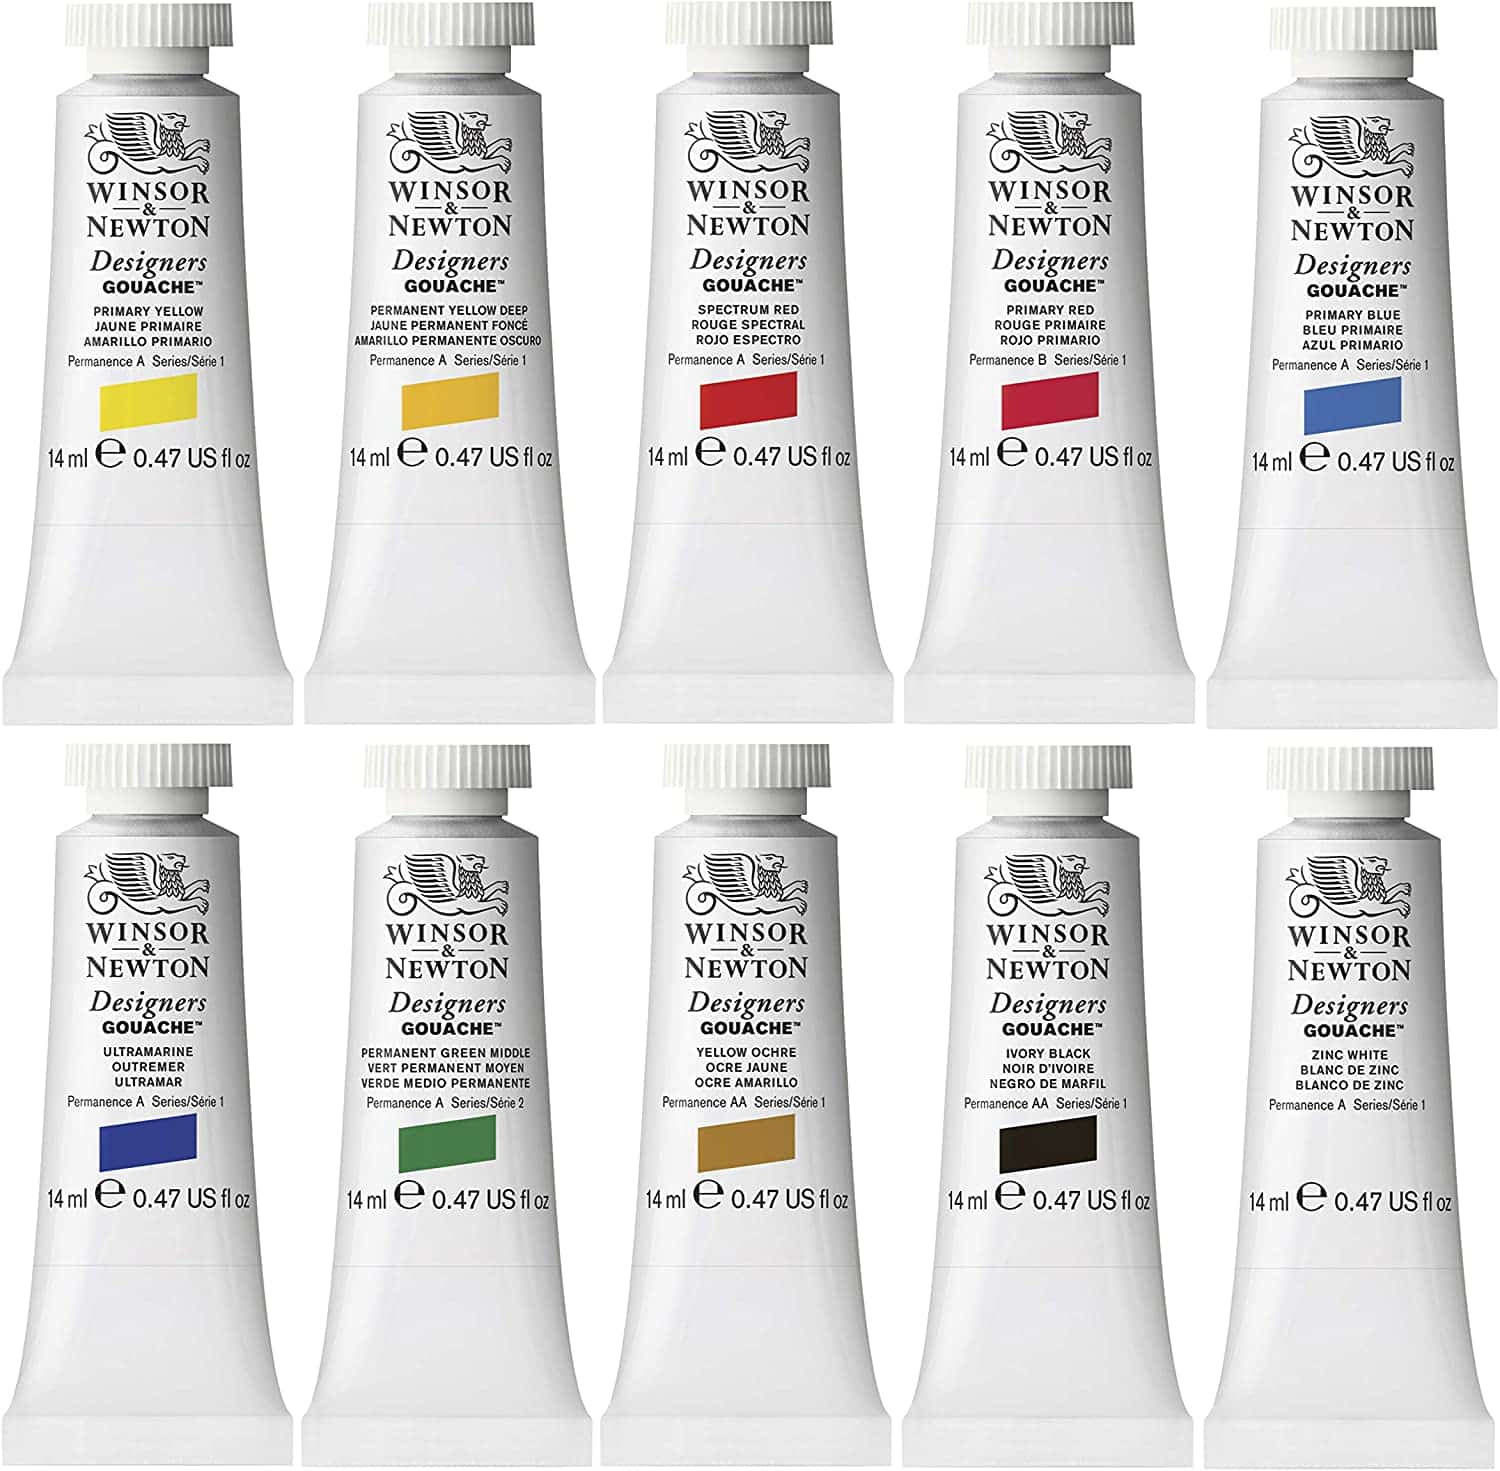 Winsor & Newton Designers' Gouache Introductory Paint Set opened